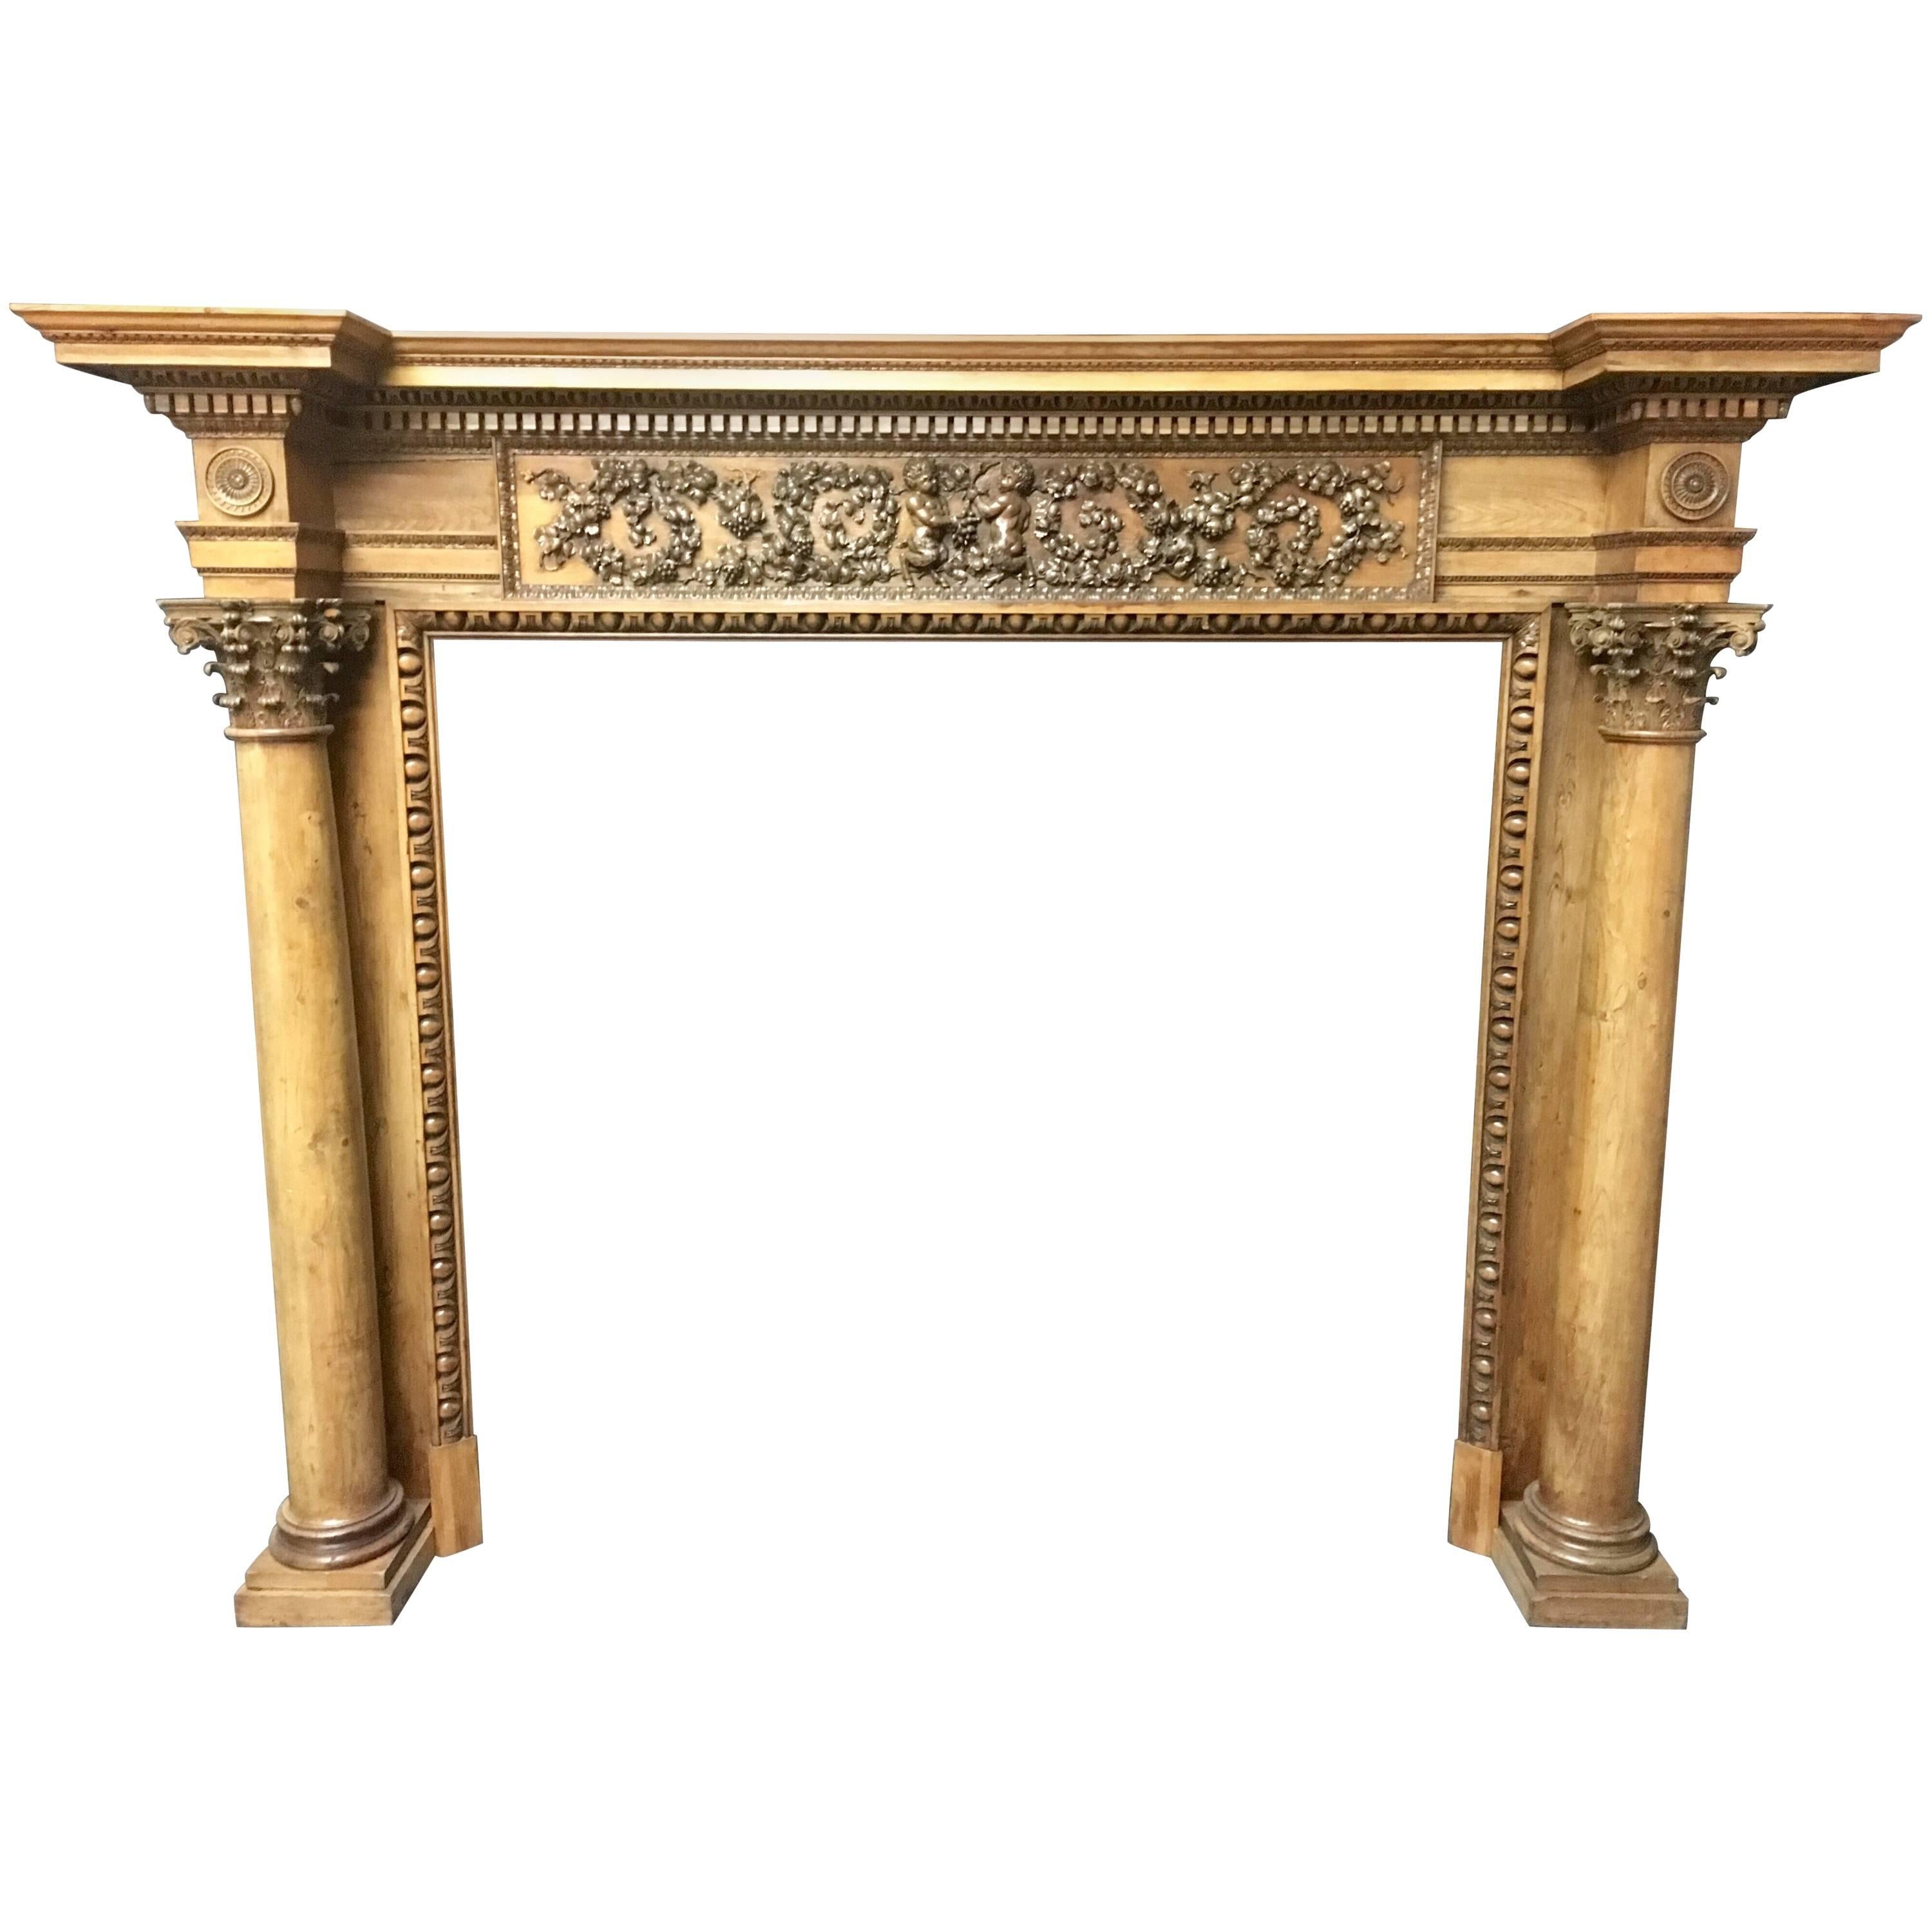 Antique Neoclassical Pine and Lime Wood Georgian Style Fireplace Surround For Sale